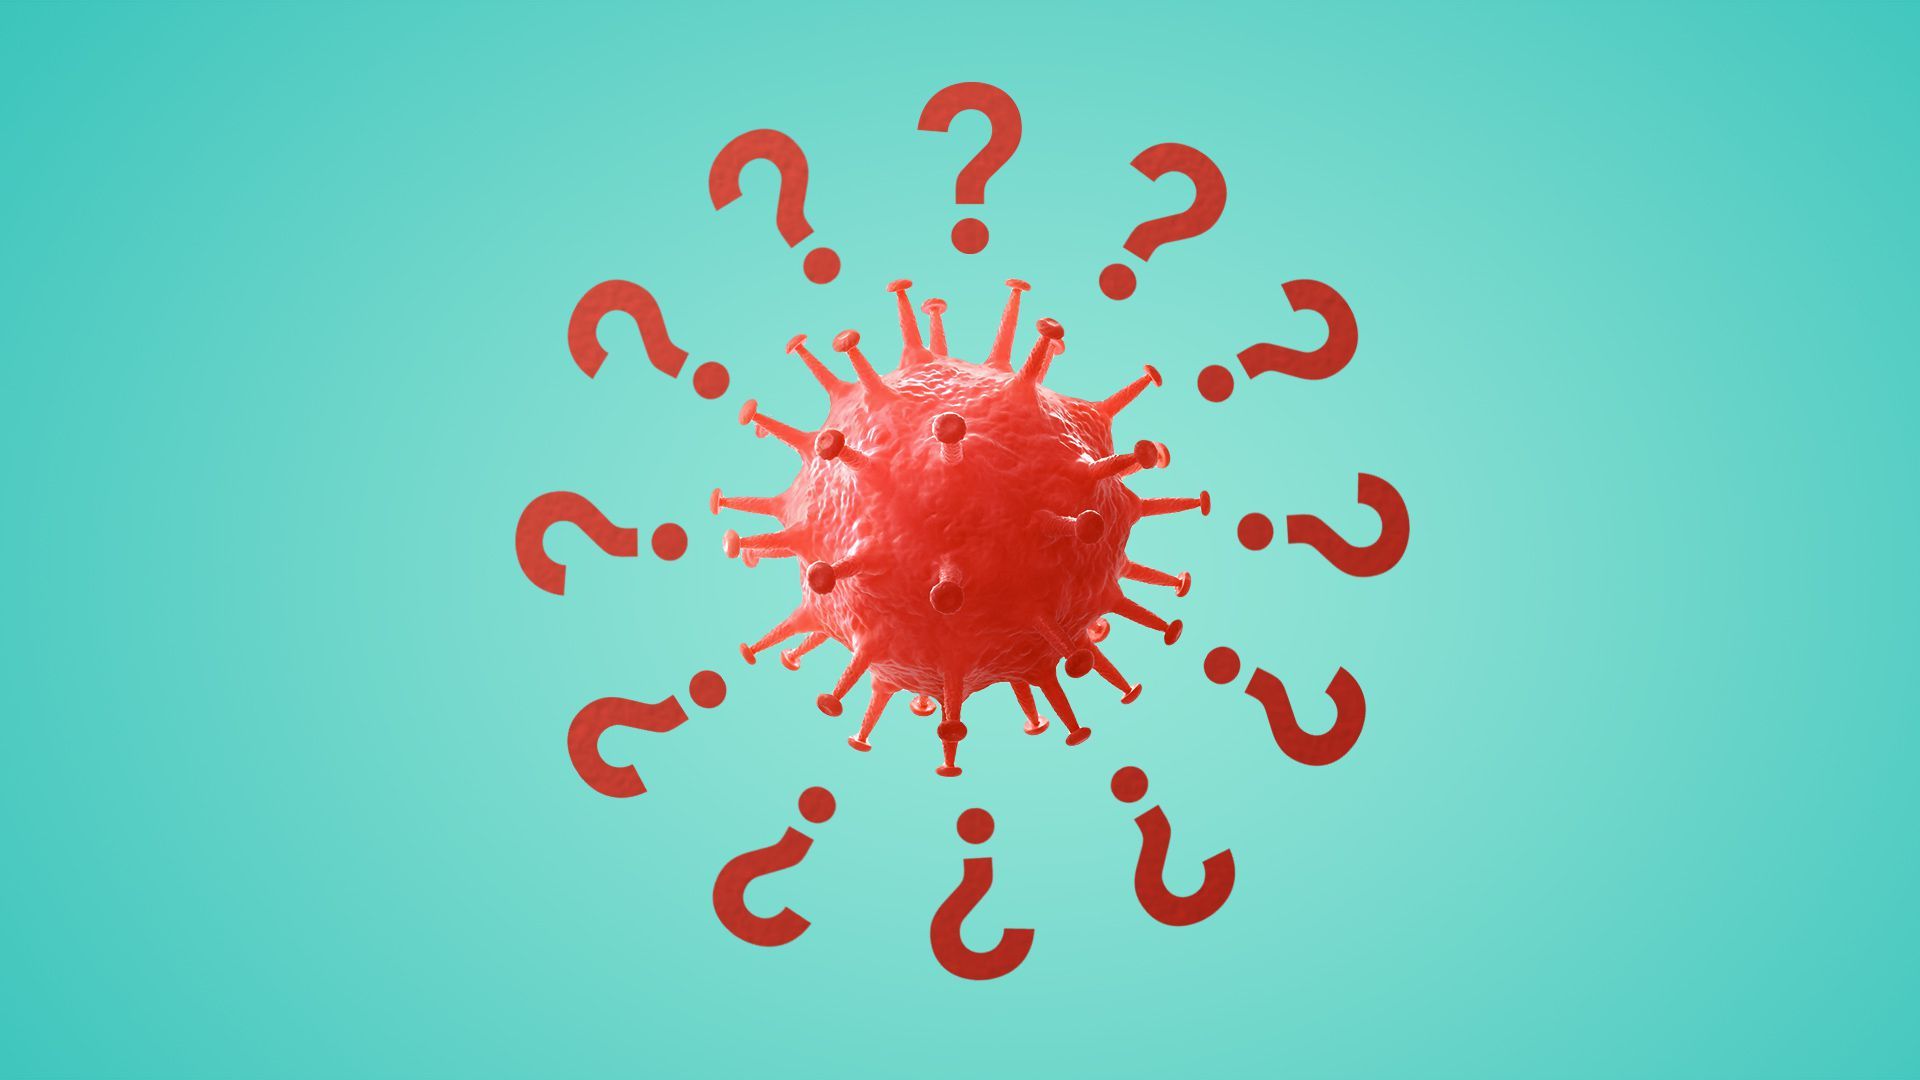 An illustration of a coronavirus cell surrounded by question marks.